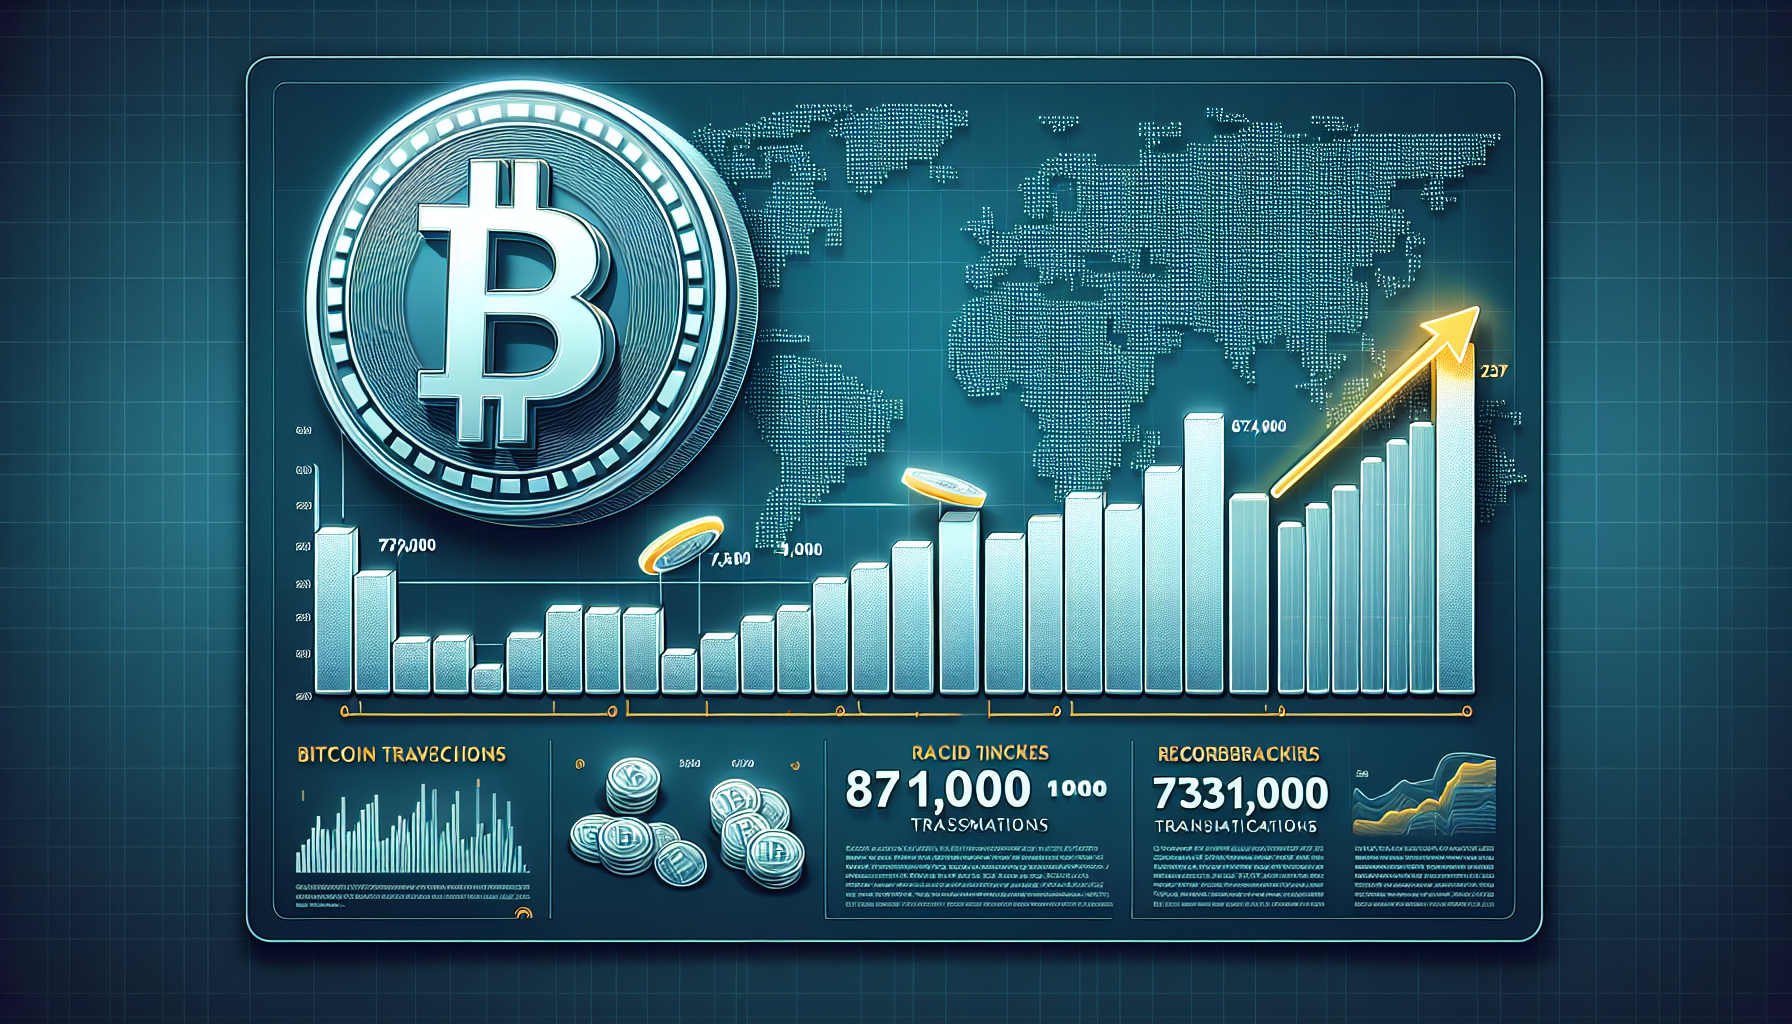 Bitcoin Breaks Daily Transaction Record with Over 731,000 Transactions